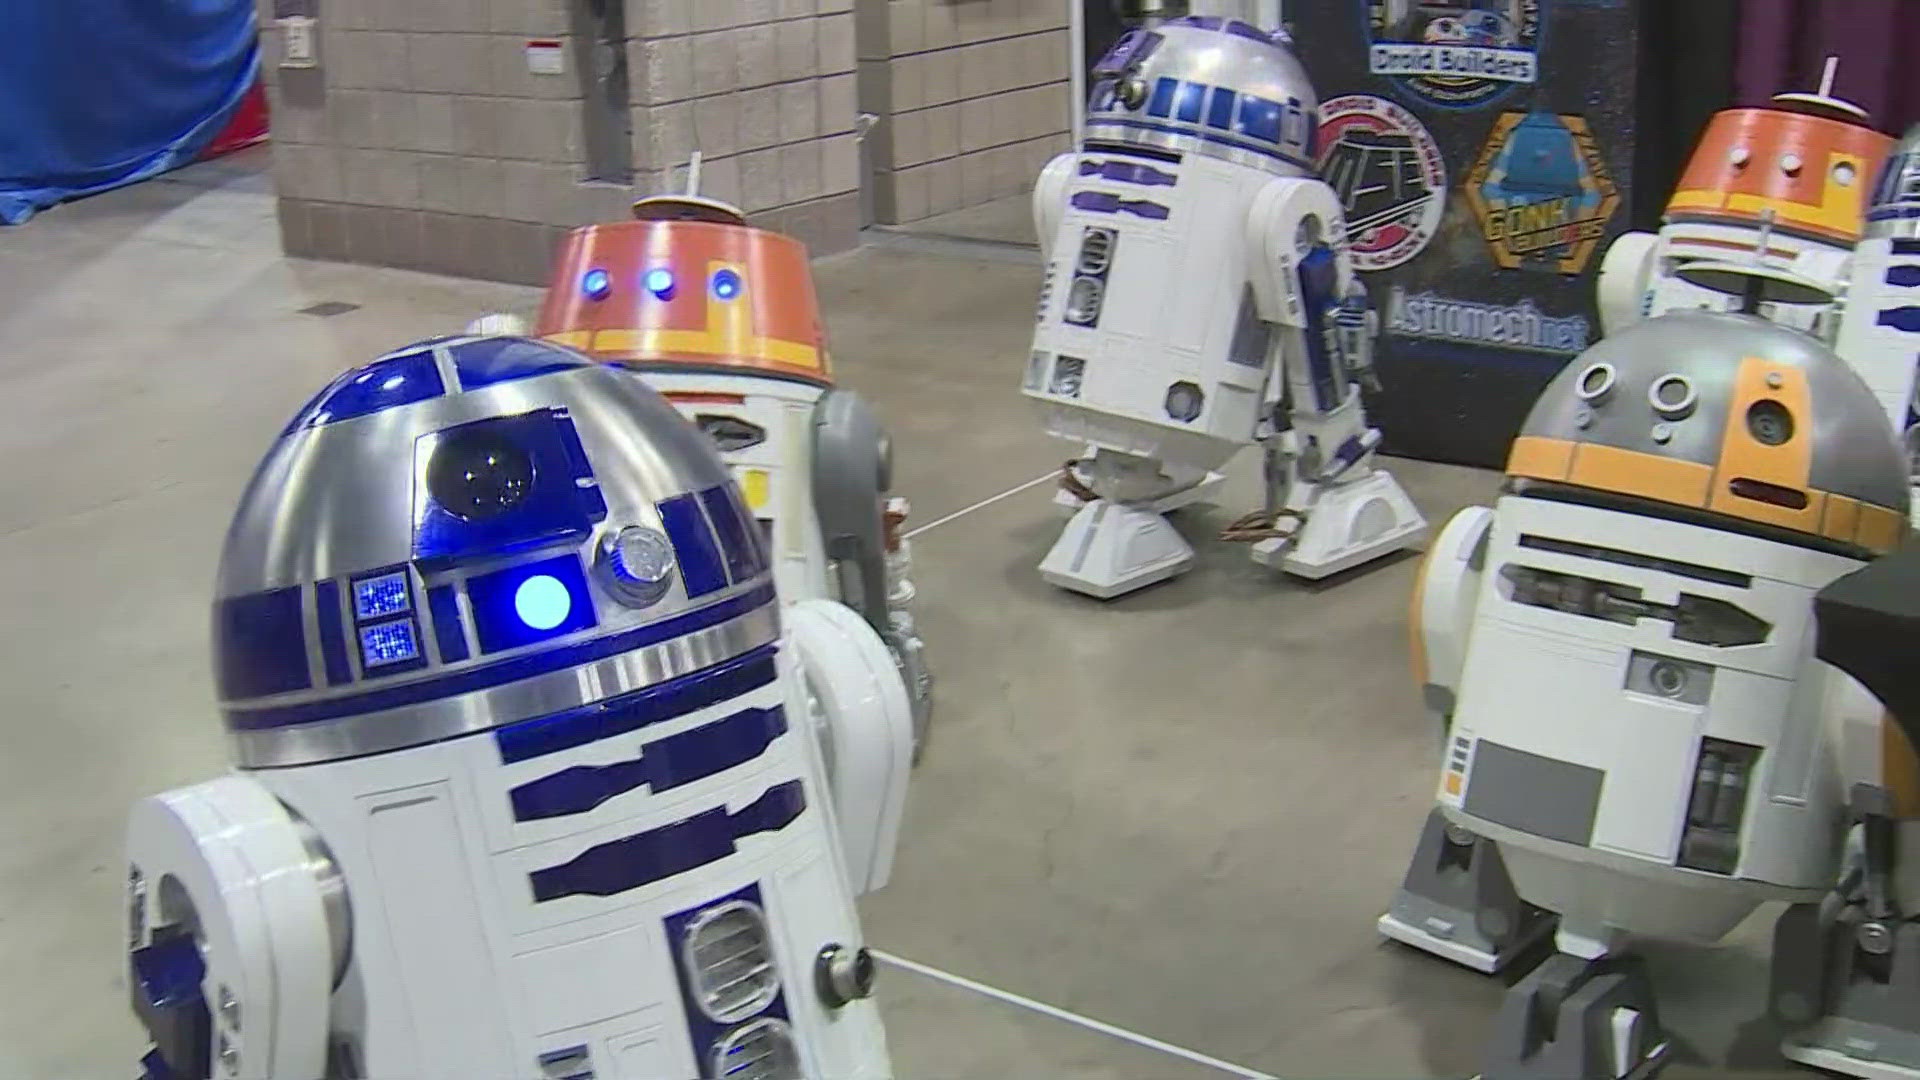 Fans can see some of their favorite characters at the Colorado Convention Center through Sunday, July 7.